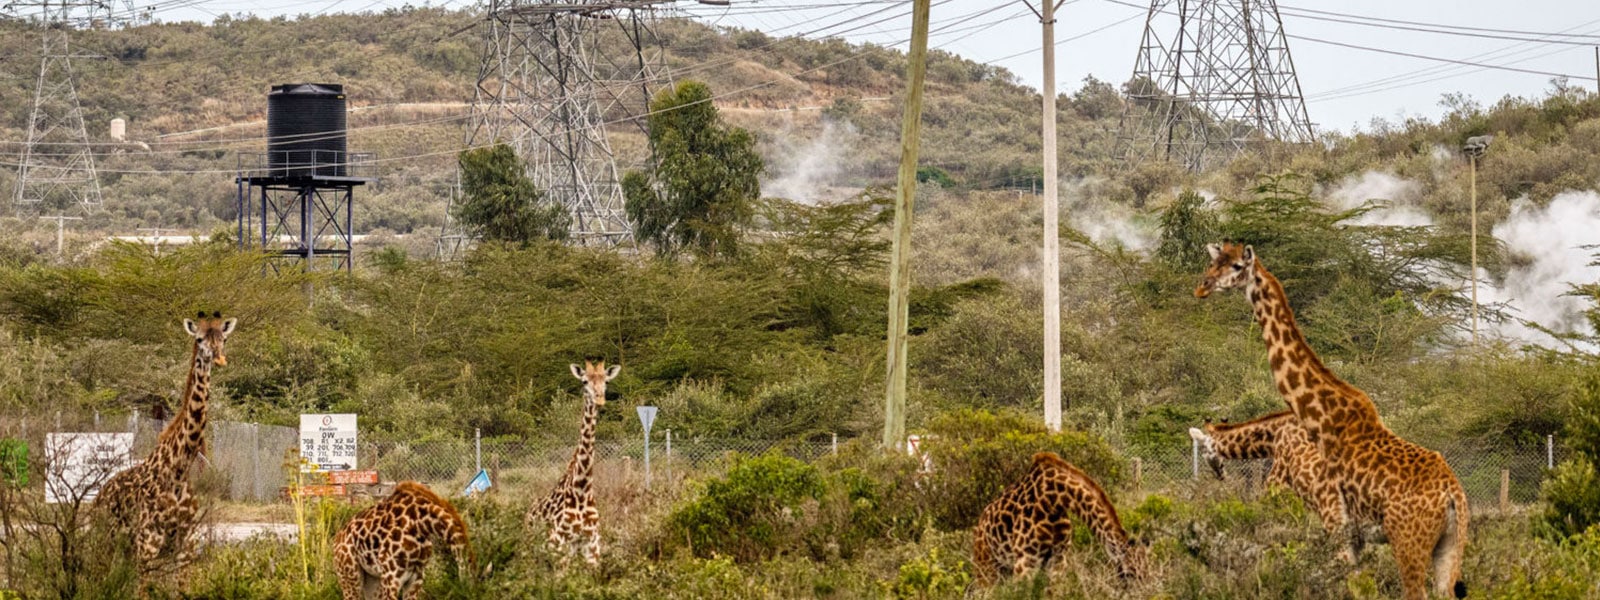 The Problem | Save Giraffes Now | Why Giraffes? Why Now?